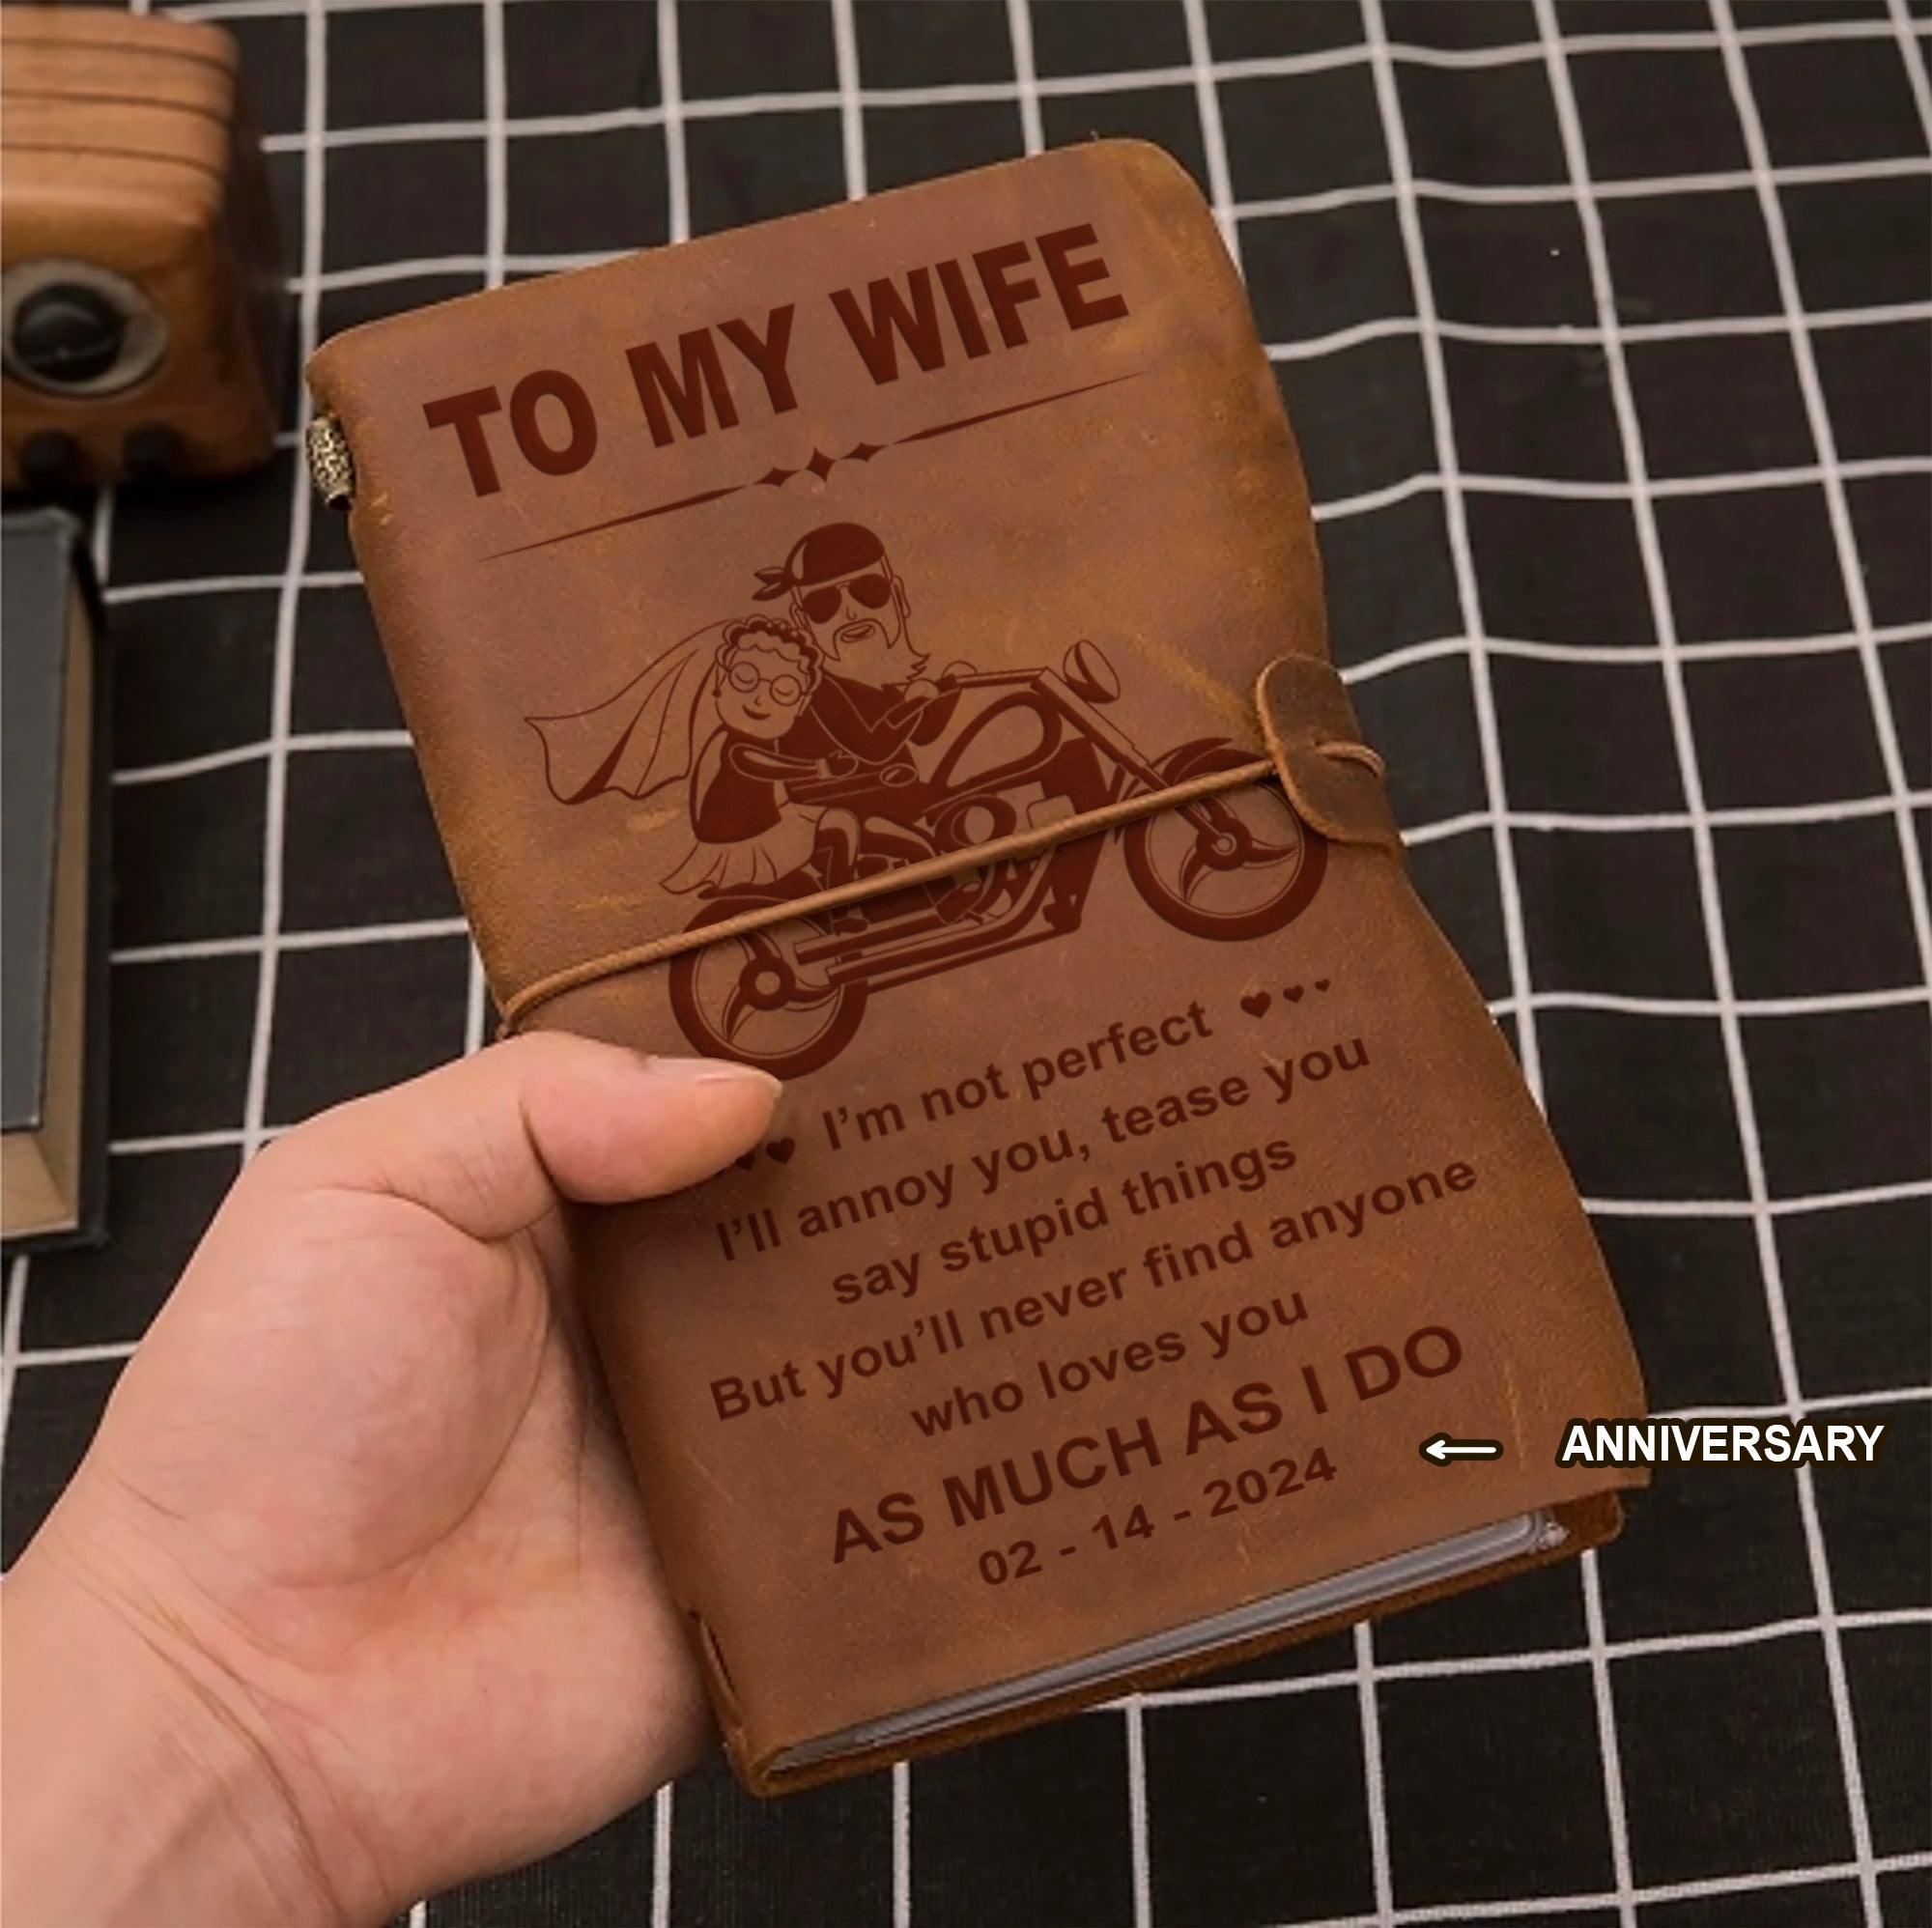 Valentines gifts-Biker Vintage Journal Husband to wife- I am not perfect i'll annoy you tease you say stupid things but you'll never find anyone who loves you as much as i do